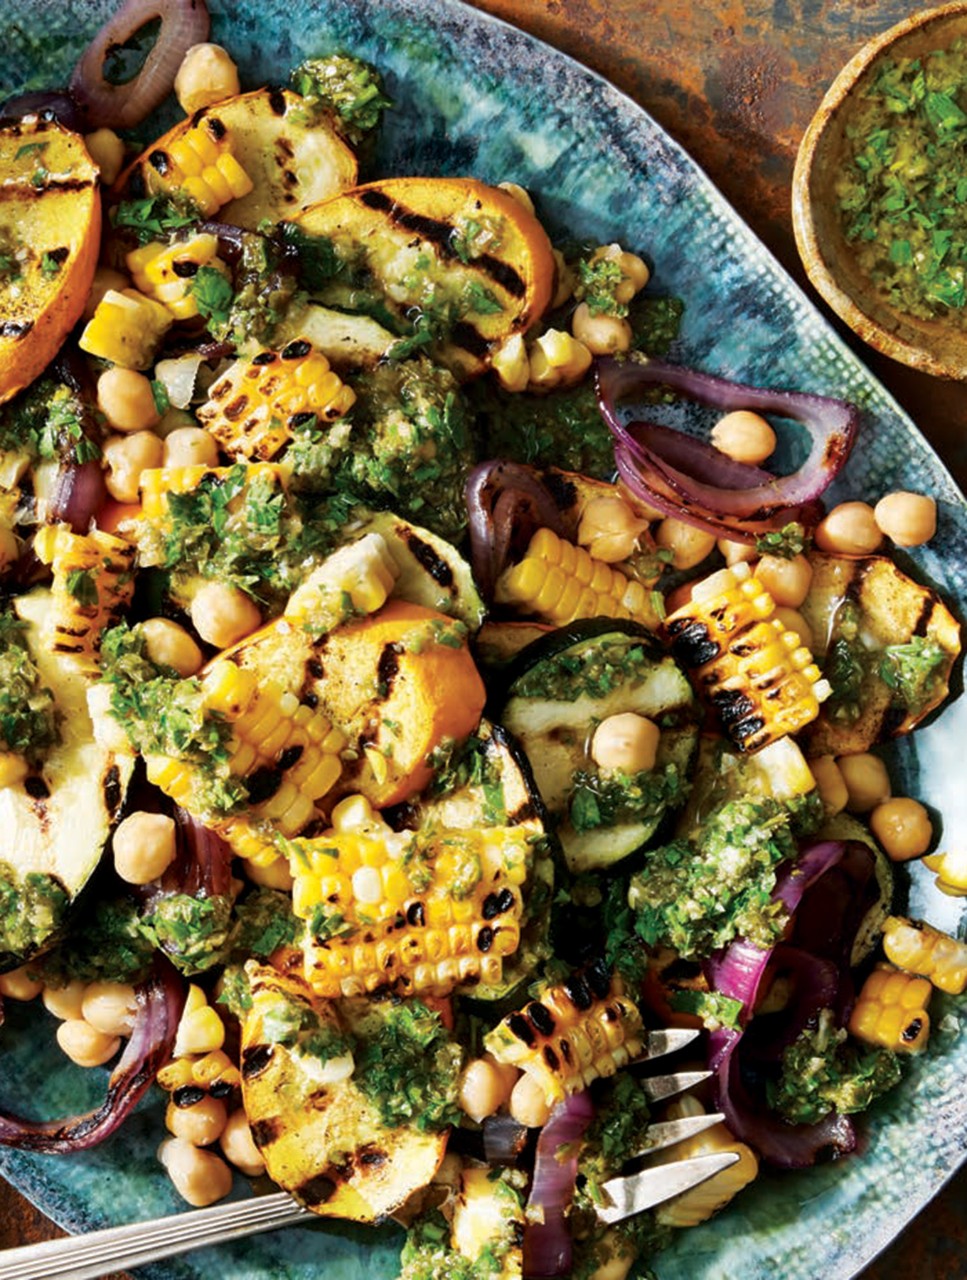 Grilled Corn & Vegetable Salad with Chimichurri